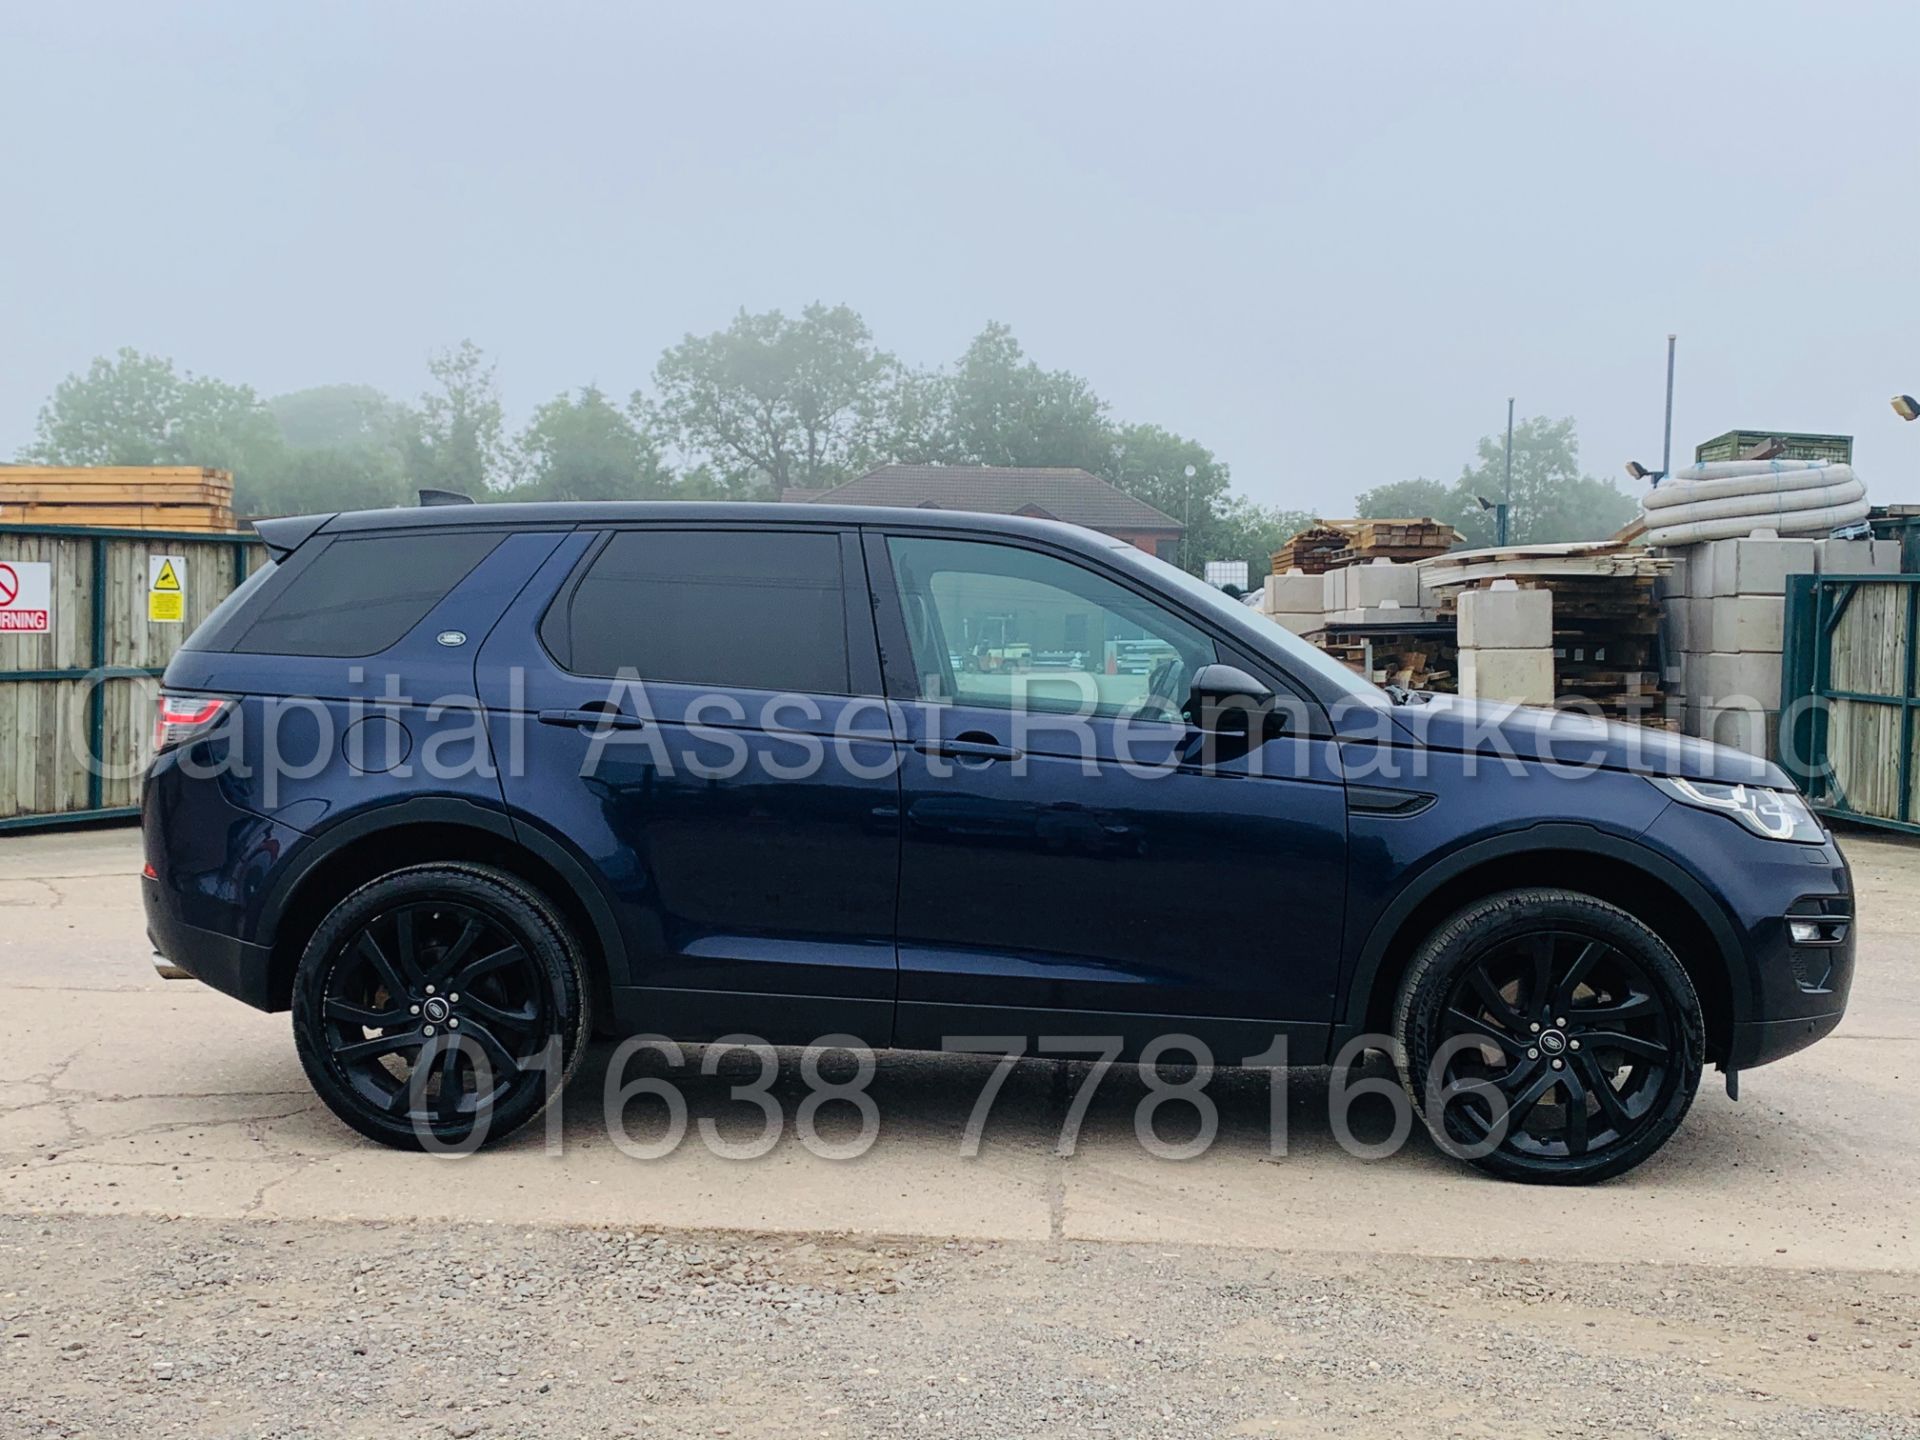 LAND ROVER DISCOVERY SPORT *HSE BLACK EDITION* SUV (2017 MODEL) '2.0 TD4 - AUTO' **MASSIVE SPEC** - Image 14 of 59